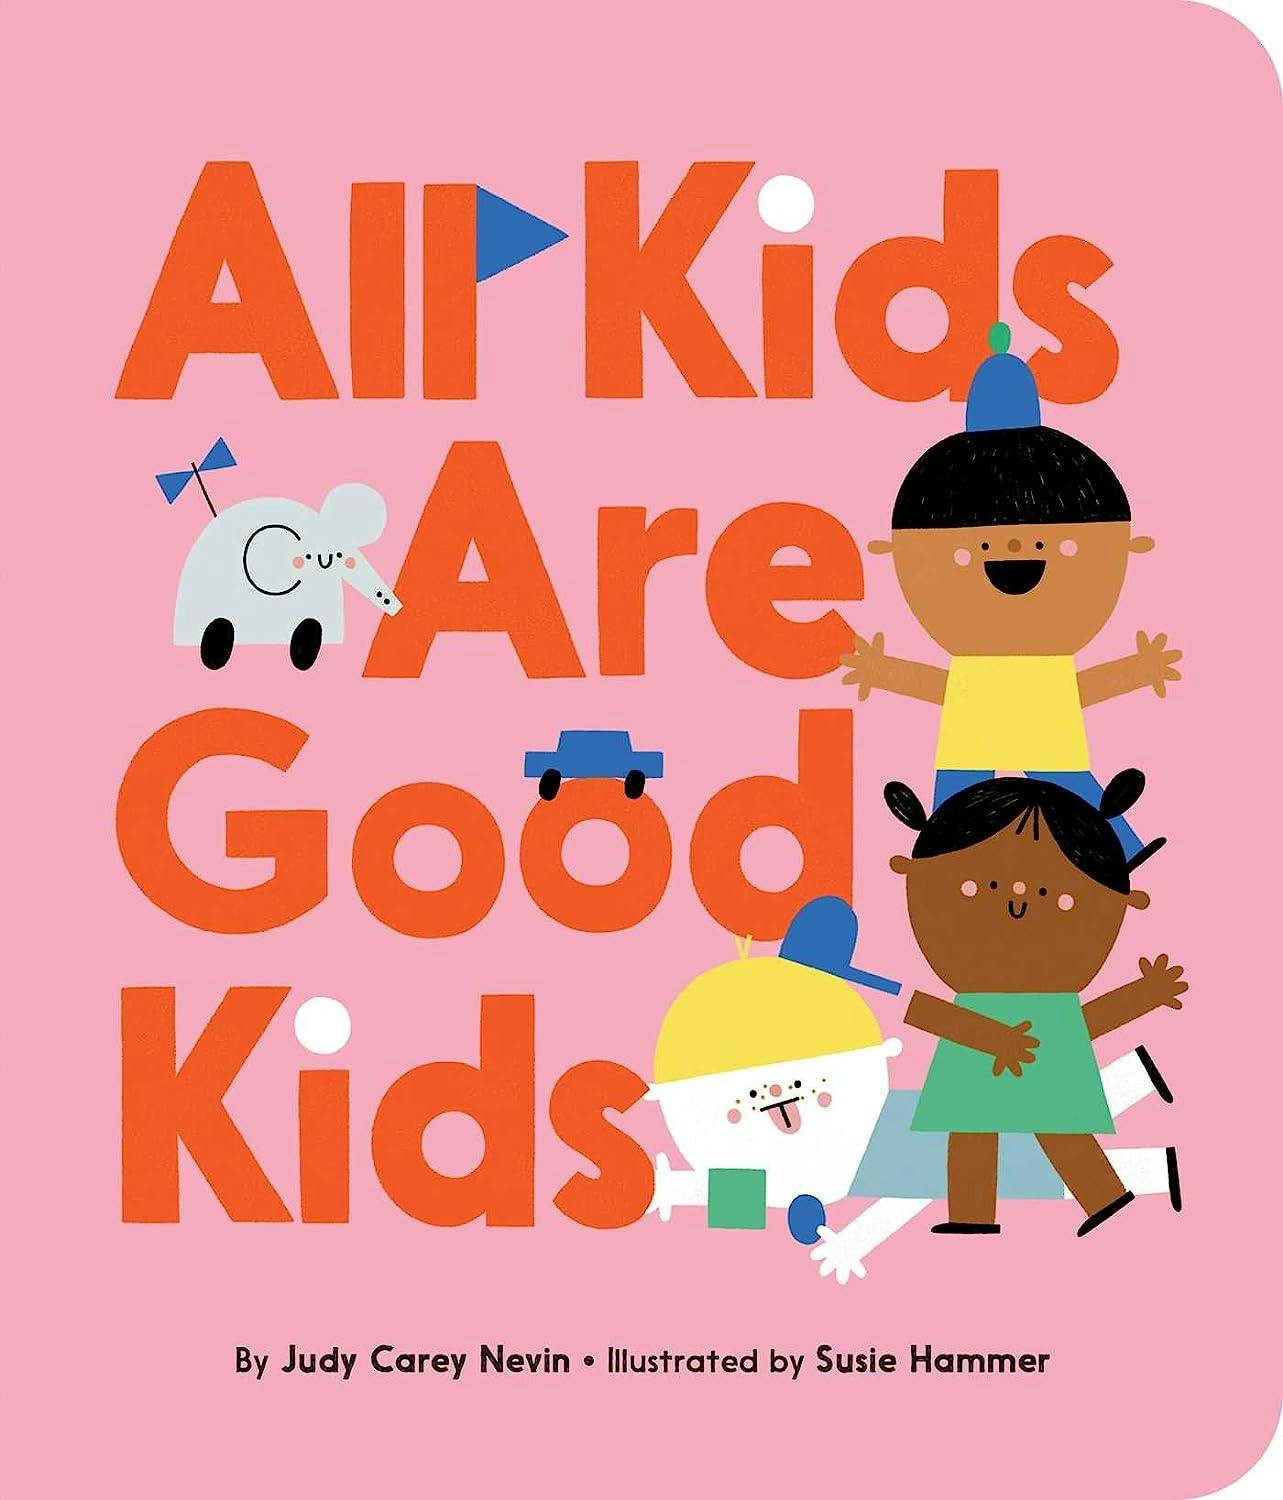 All Kids Are Good Kids book cover